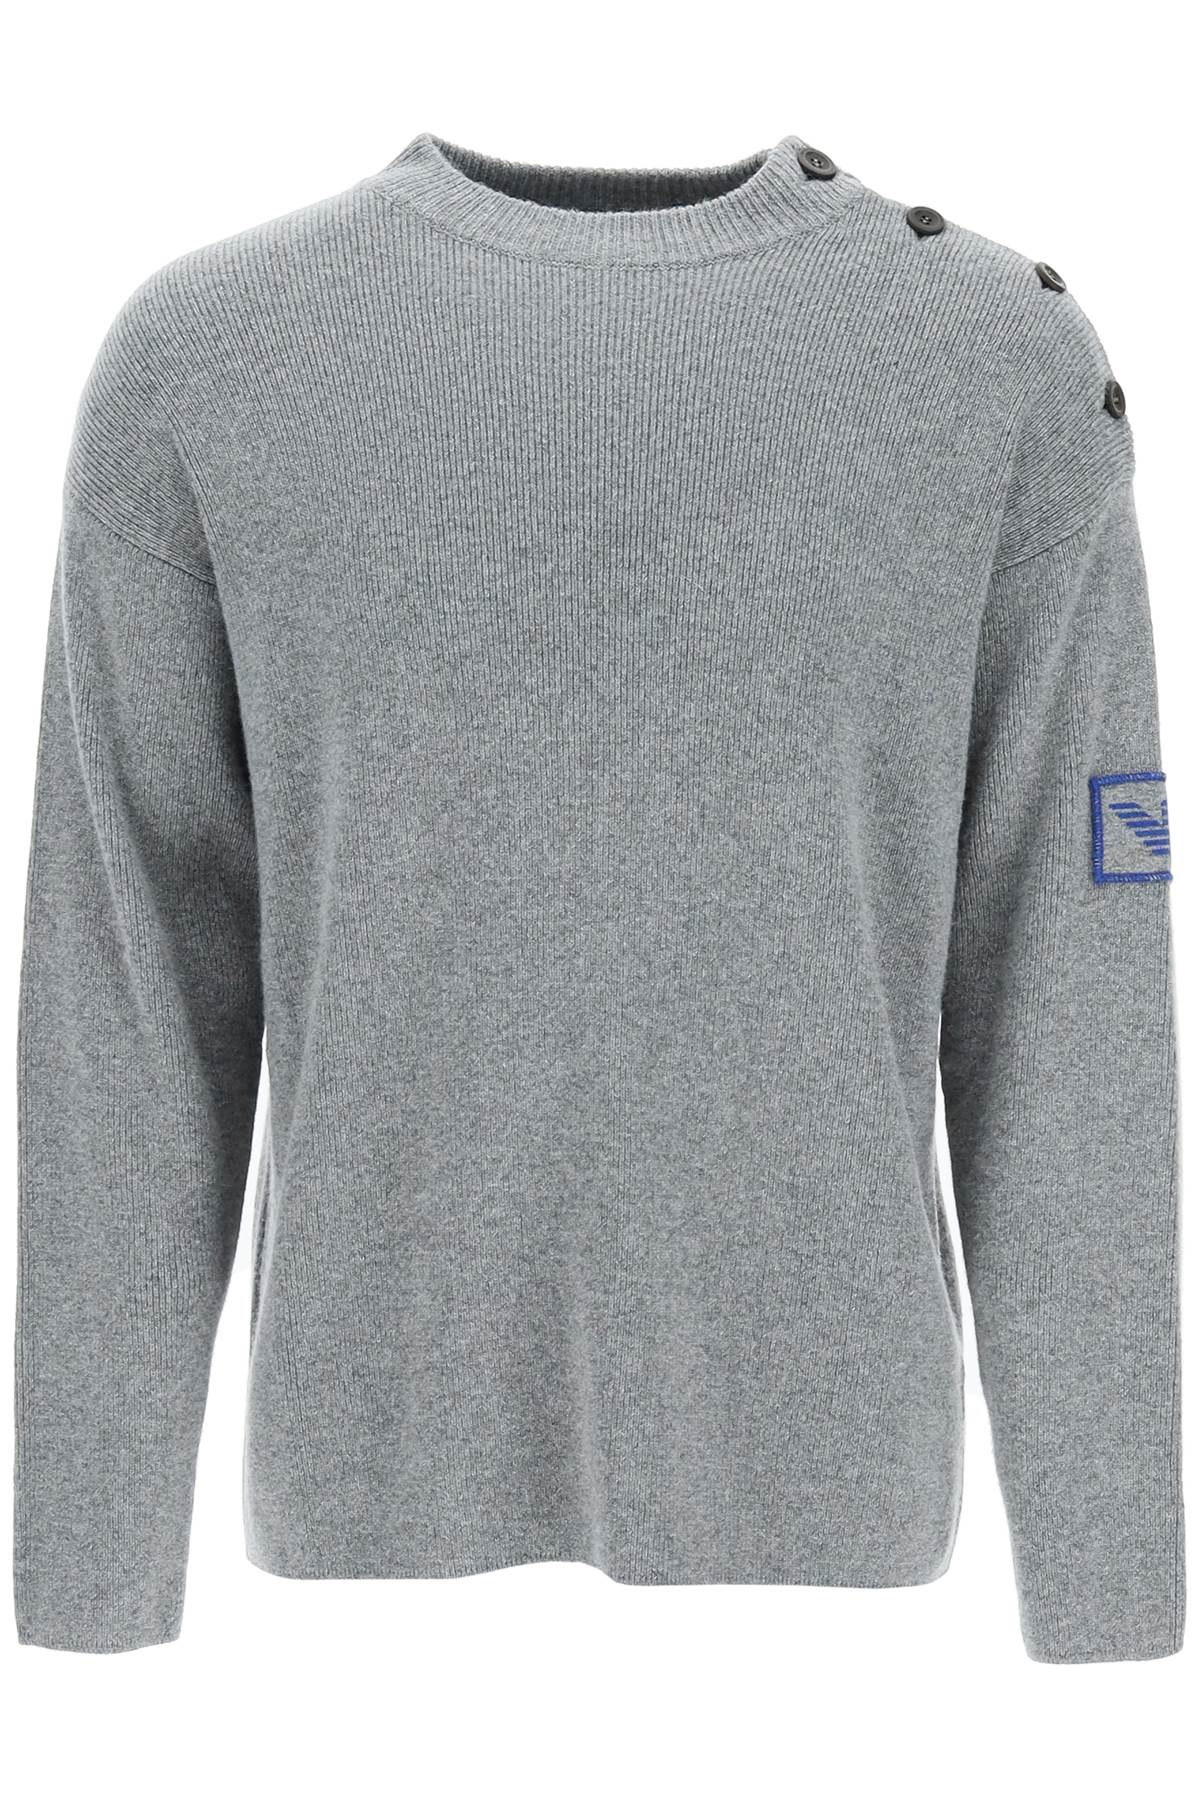 Emporio Armani Earctic Sweater With Buttons